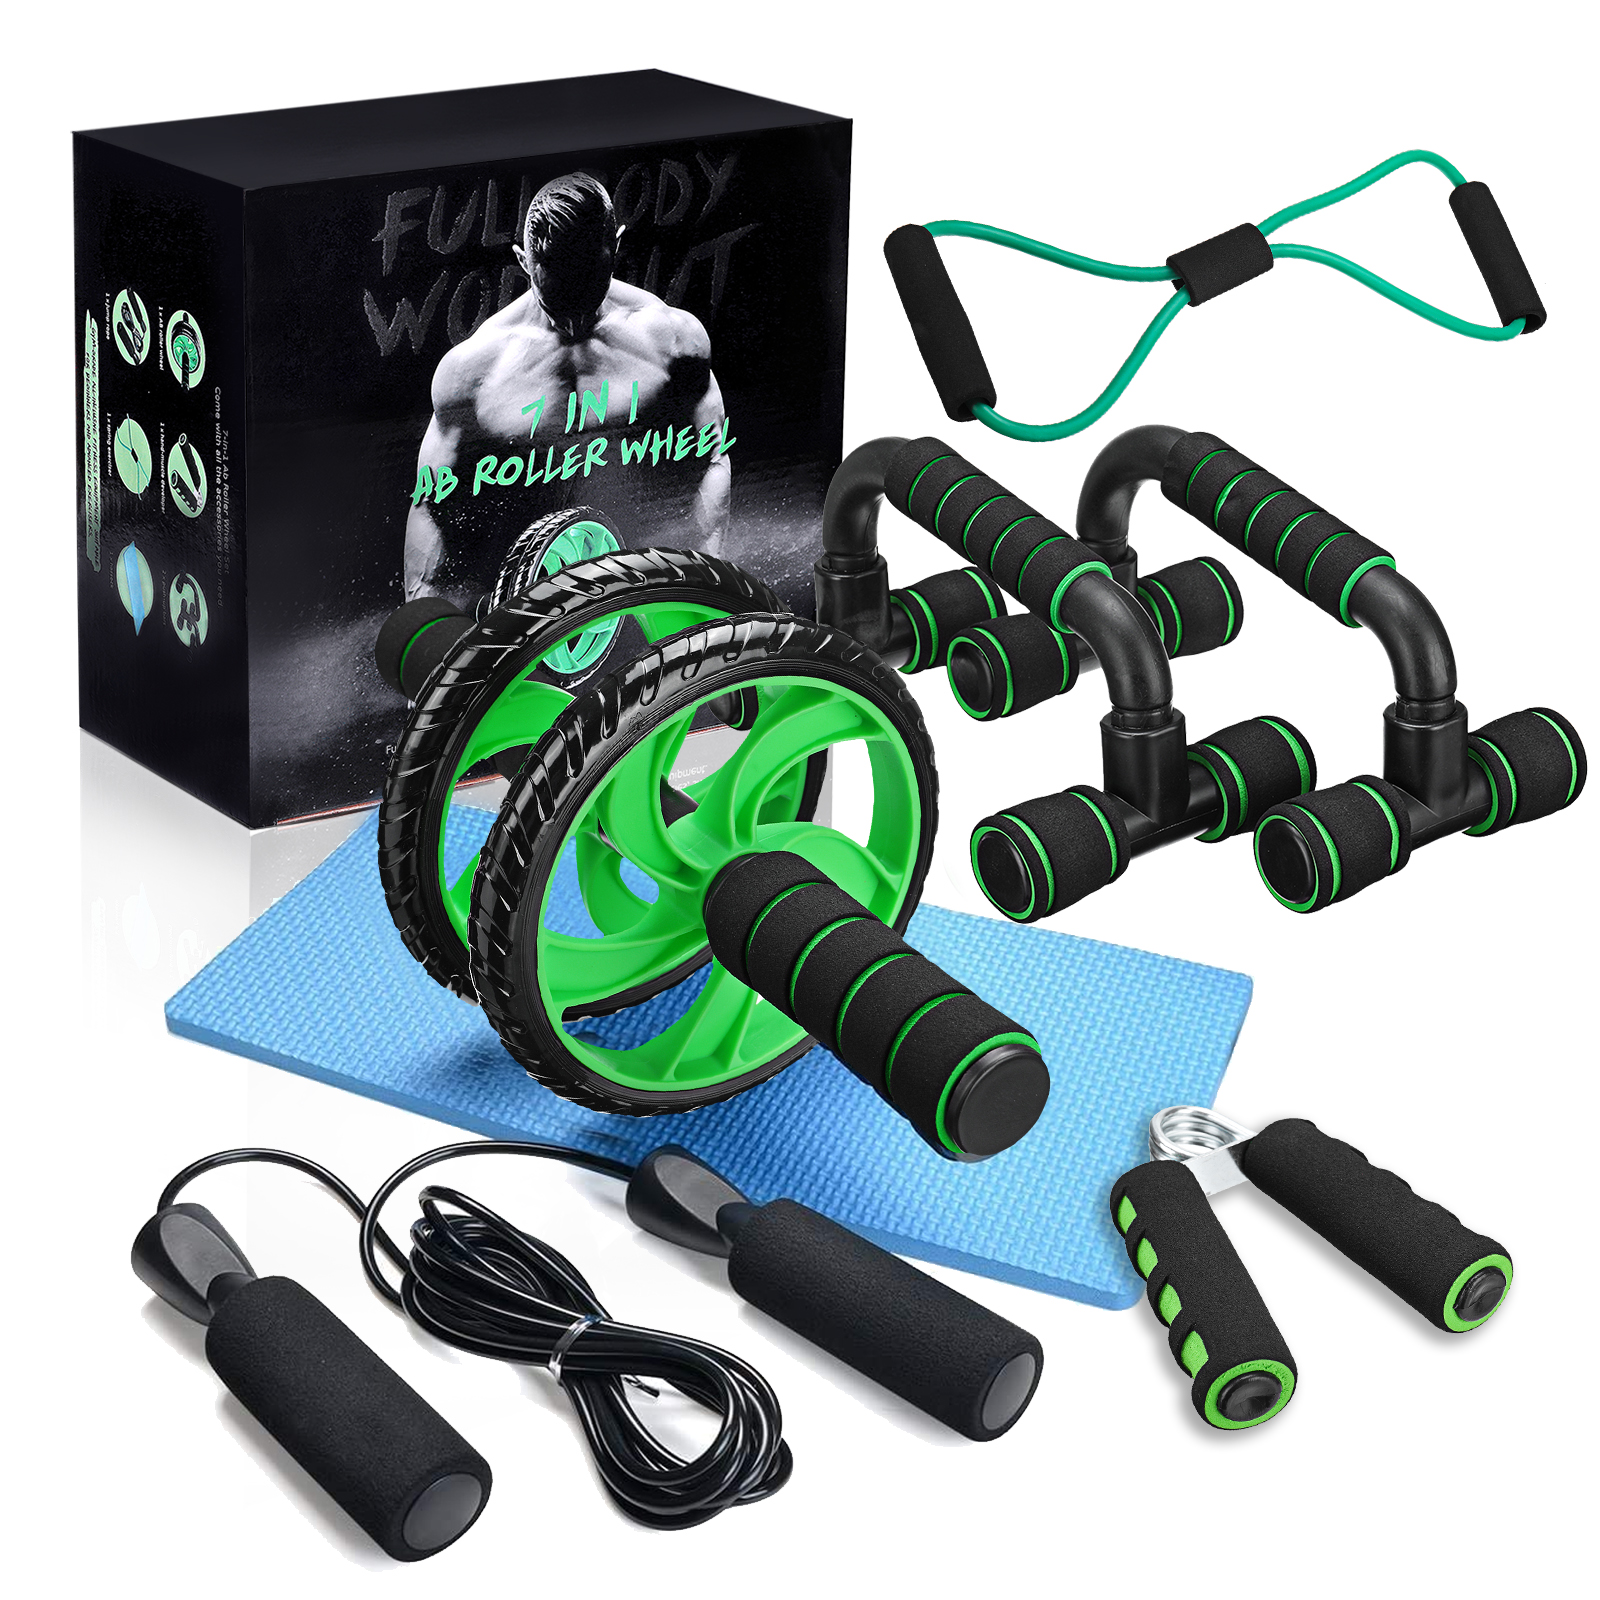 7-PcsSet-Ab-Rollers-Kit-Push-UP-Bar-Jump-Rope-Hand-Gripper-Knee-Pad-Resistance-Band-Exercise-Trainin-1810079-1